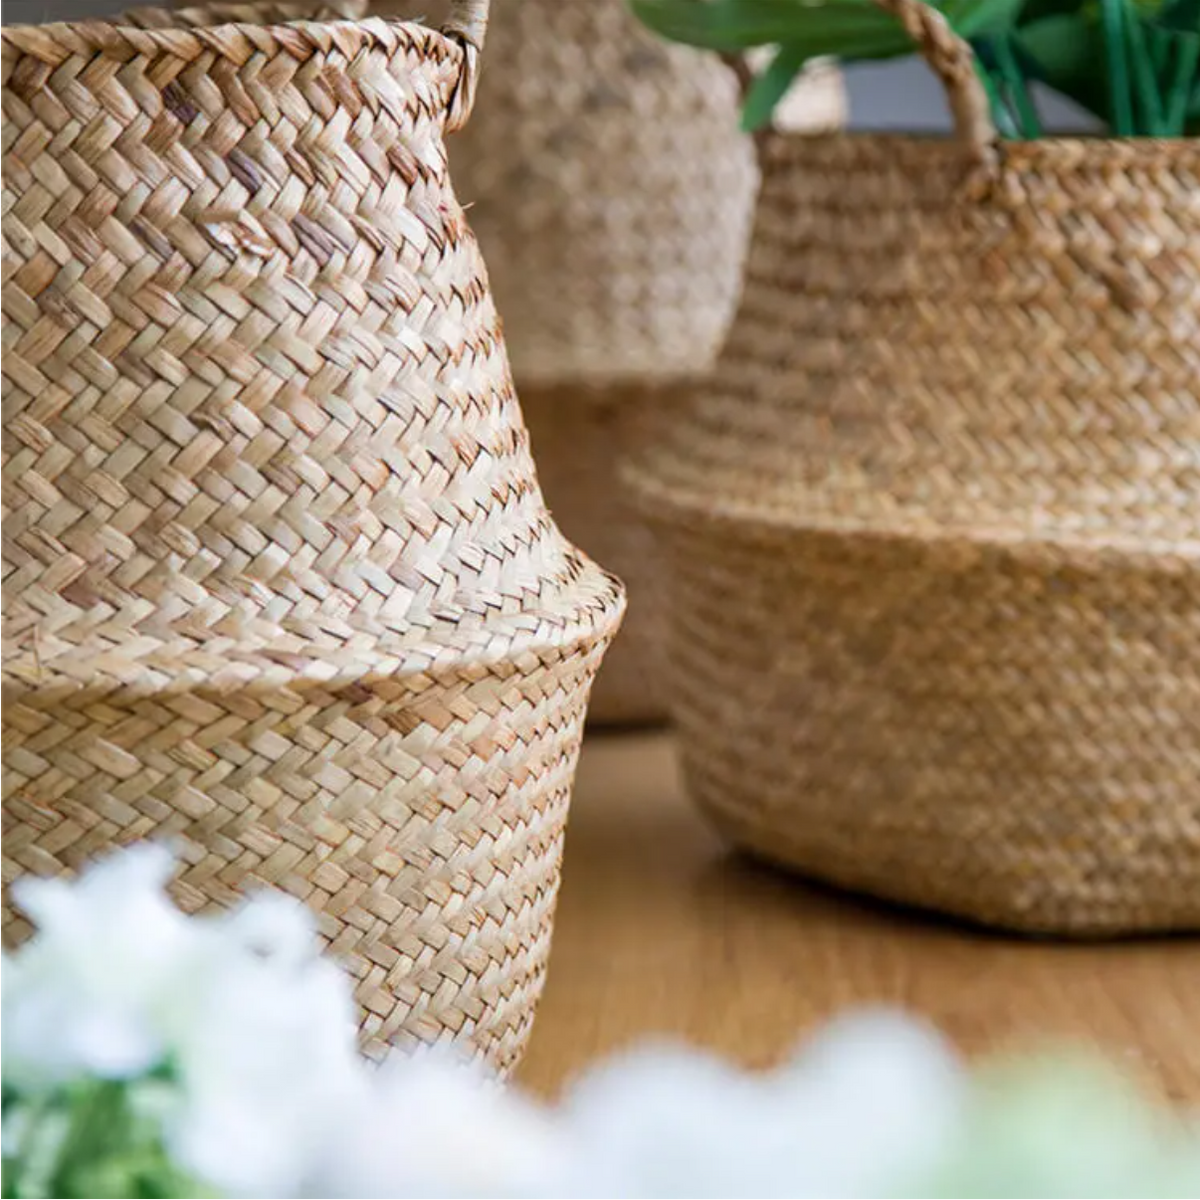 Willow Foldable Basket